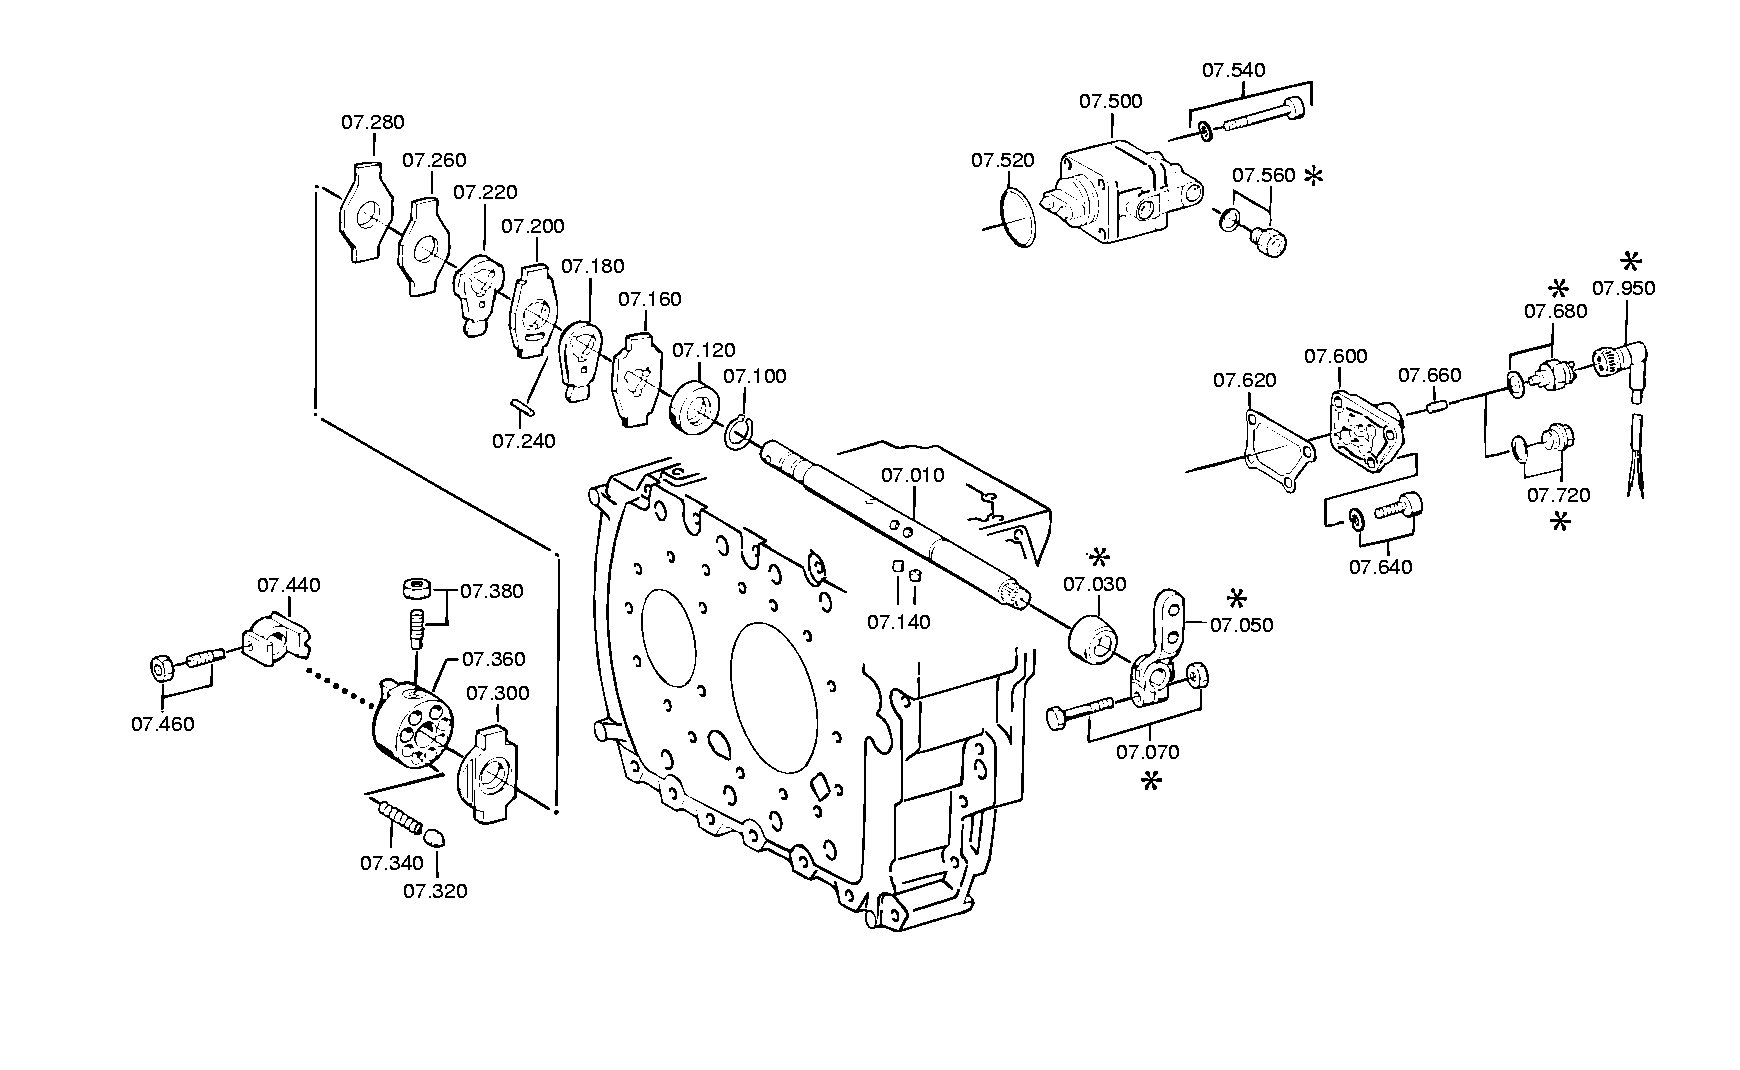 drawing for DAF 692183 - CUT-OFF VALVE (figure 1)